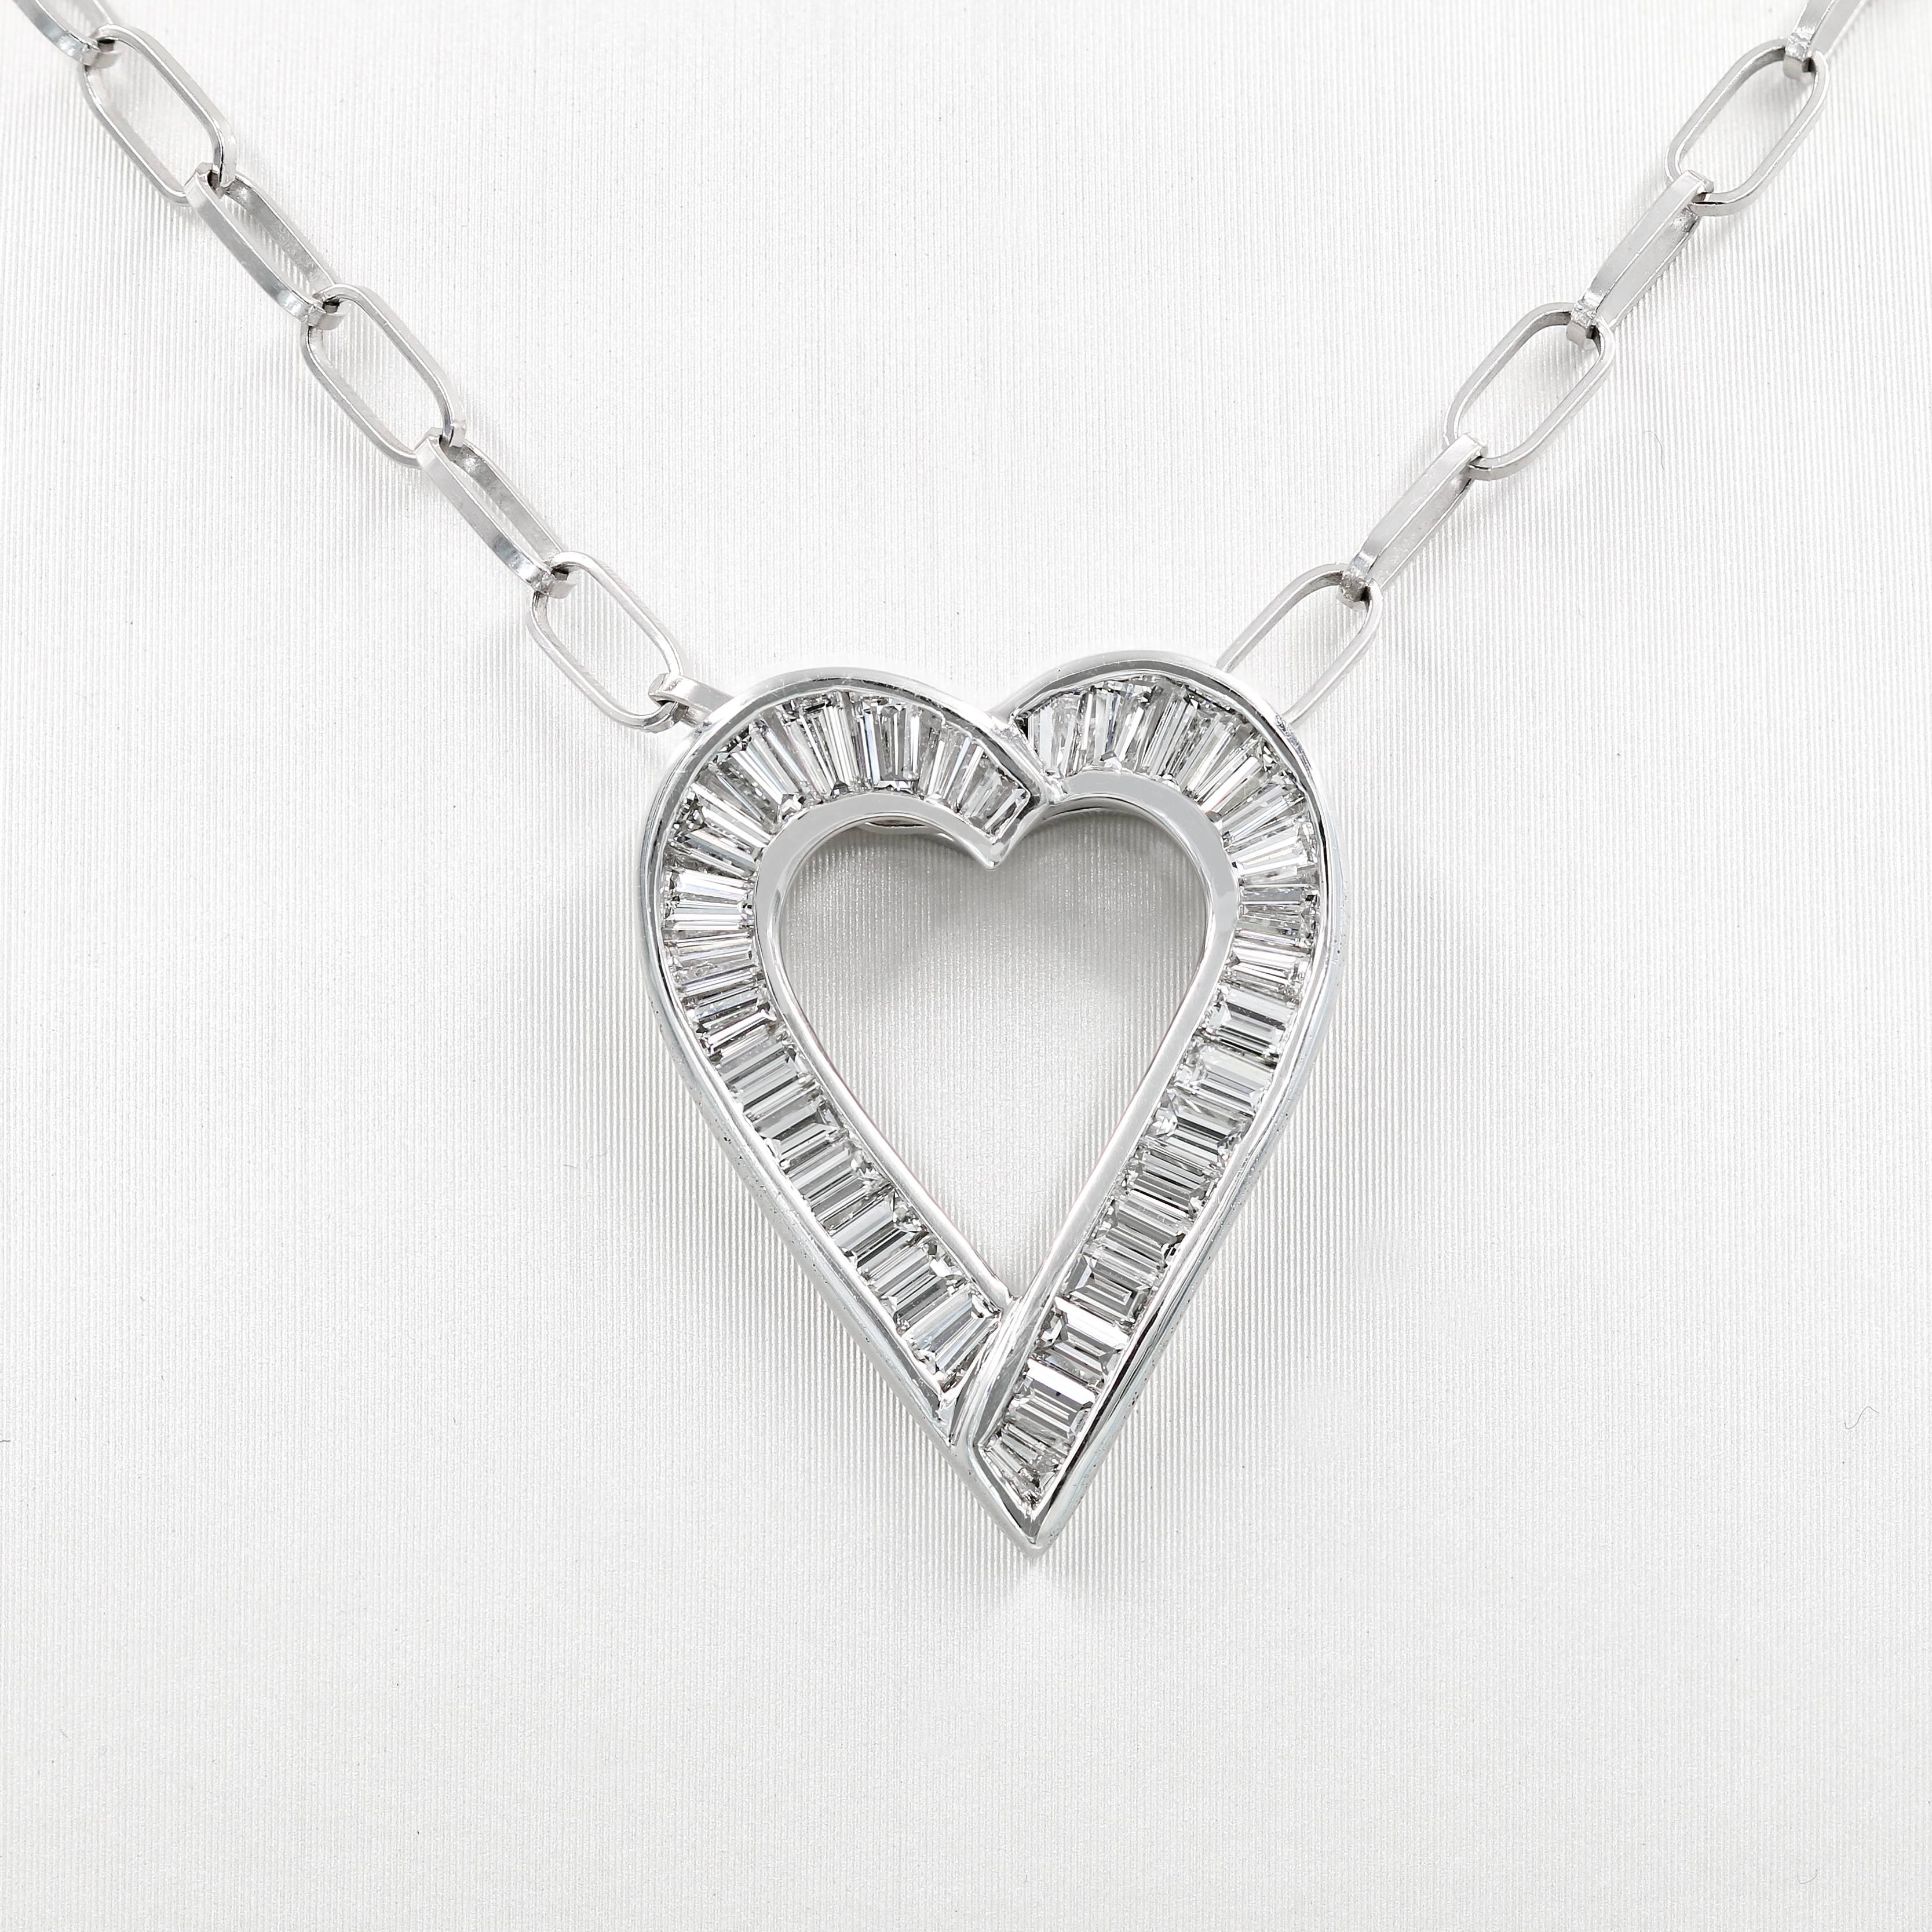 This elegant baguette diamond heart shape necklace in 18kt. white gold is a custom crafted Lester Lampert original. It contains 31 baguettes= 1.68cts. t.w.  (the diamonds are G in color and VS clarity)

The piece is suspended from an 18kt. white